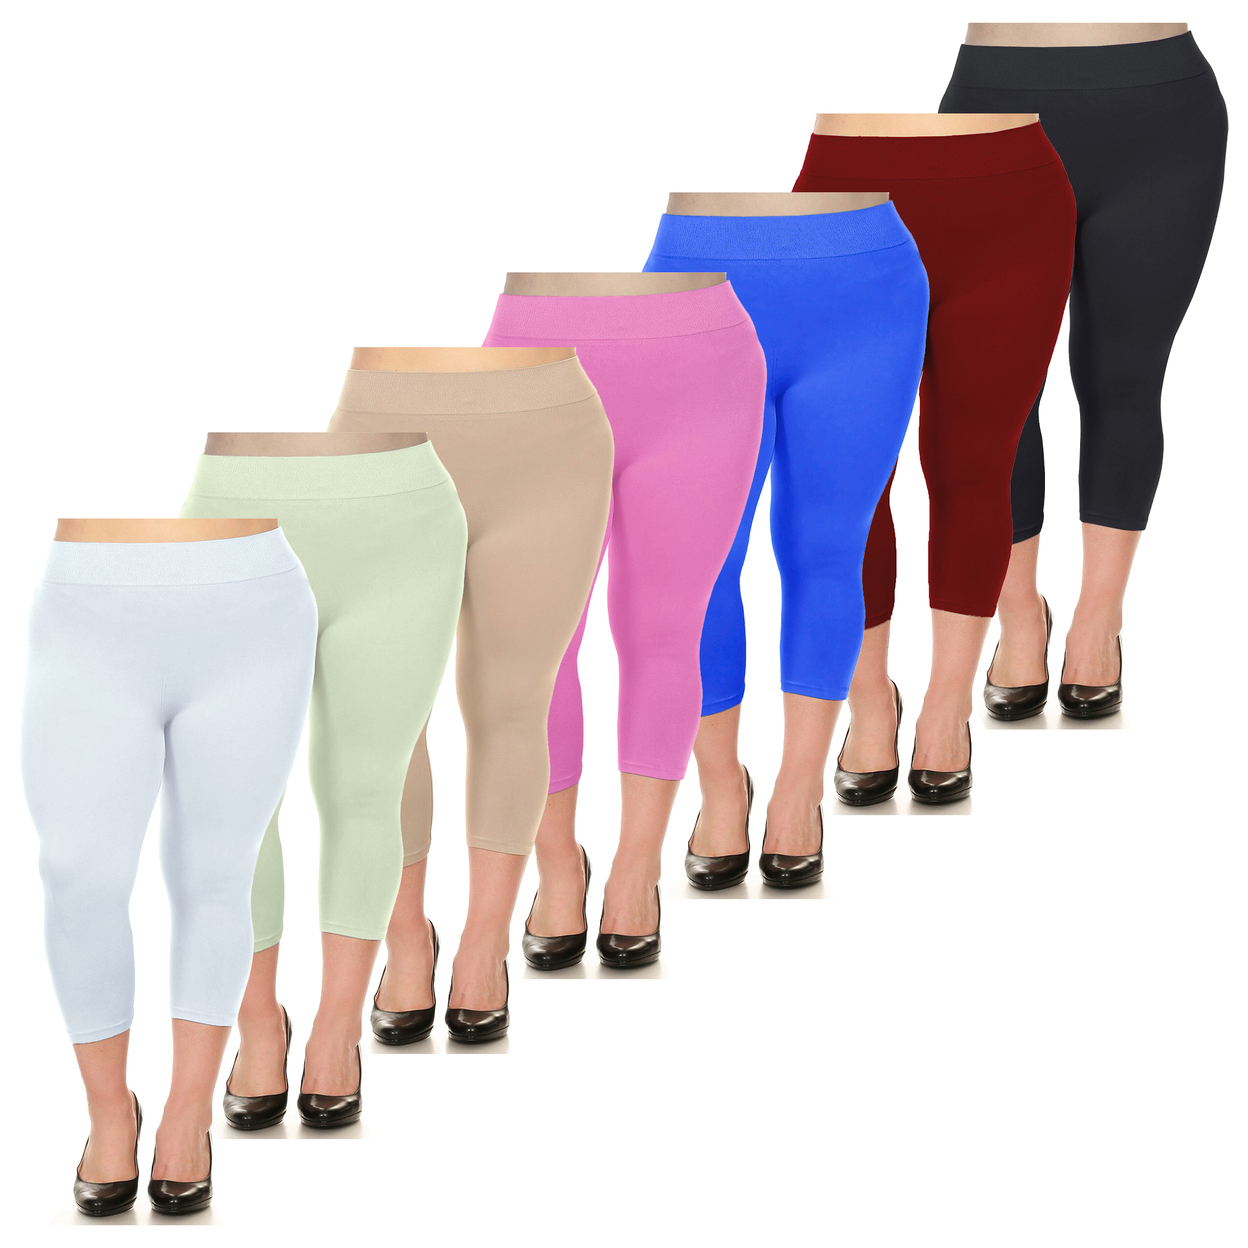 2-Pack: Women's Ultra-Soft High Waisted Smooth Stretch Active Yoga Capri Leggings Plus Size Available - Beige & Red, 4x